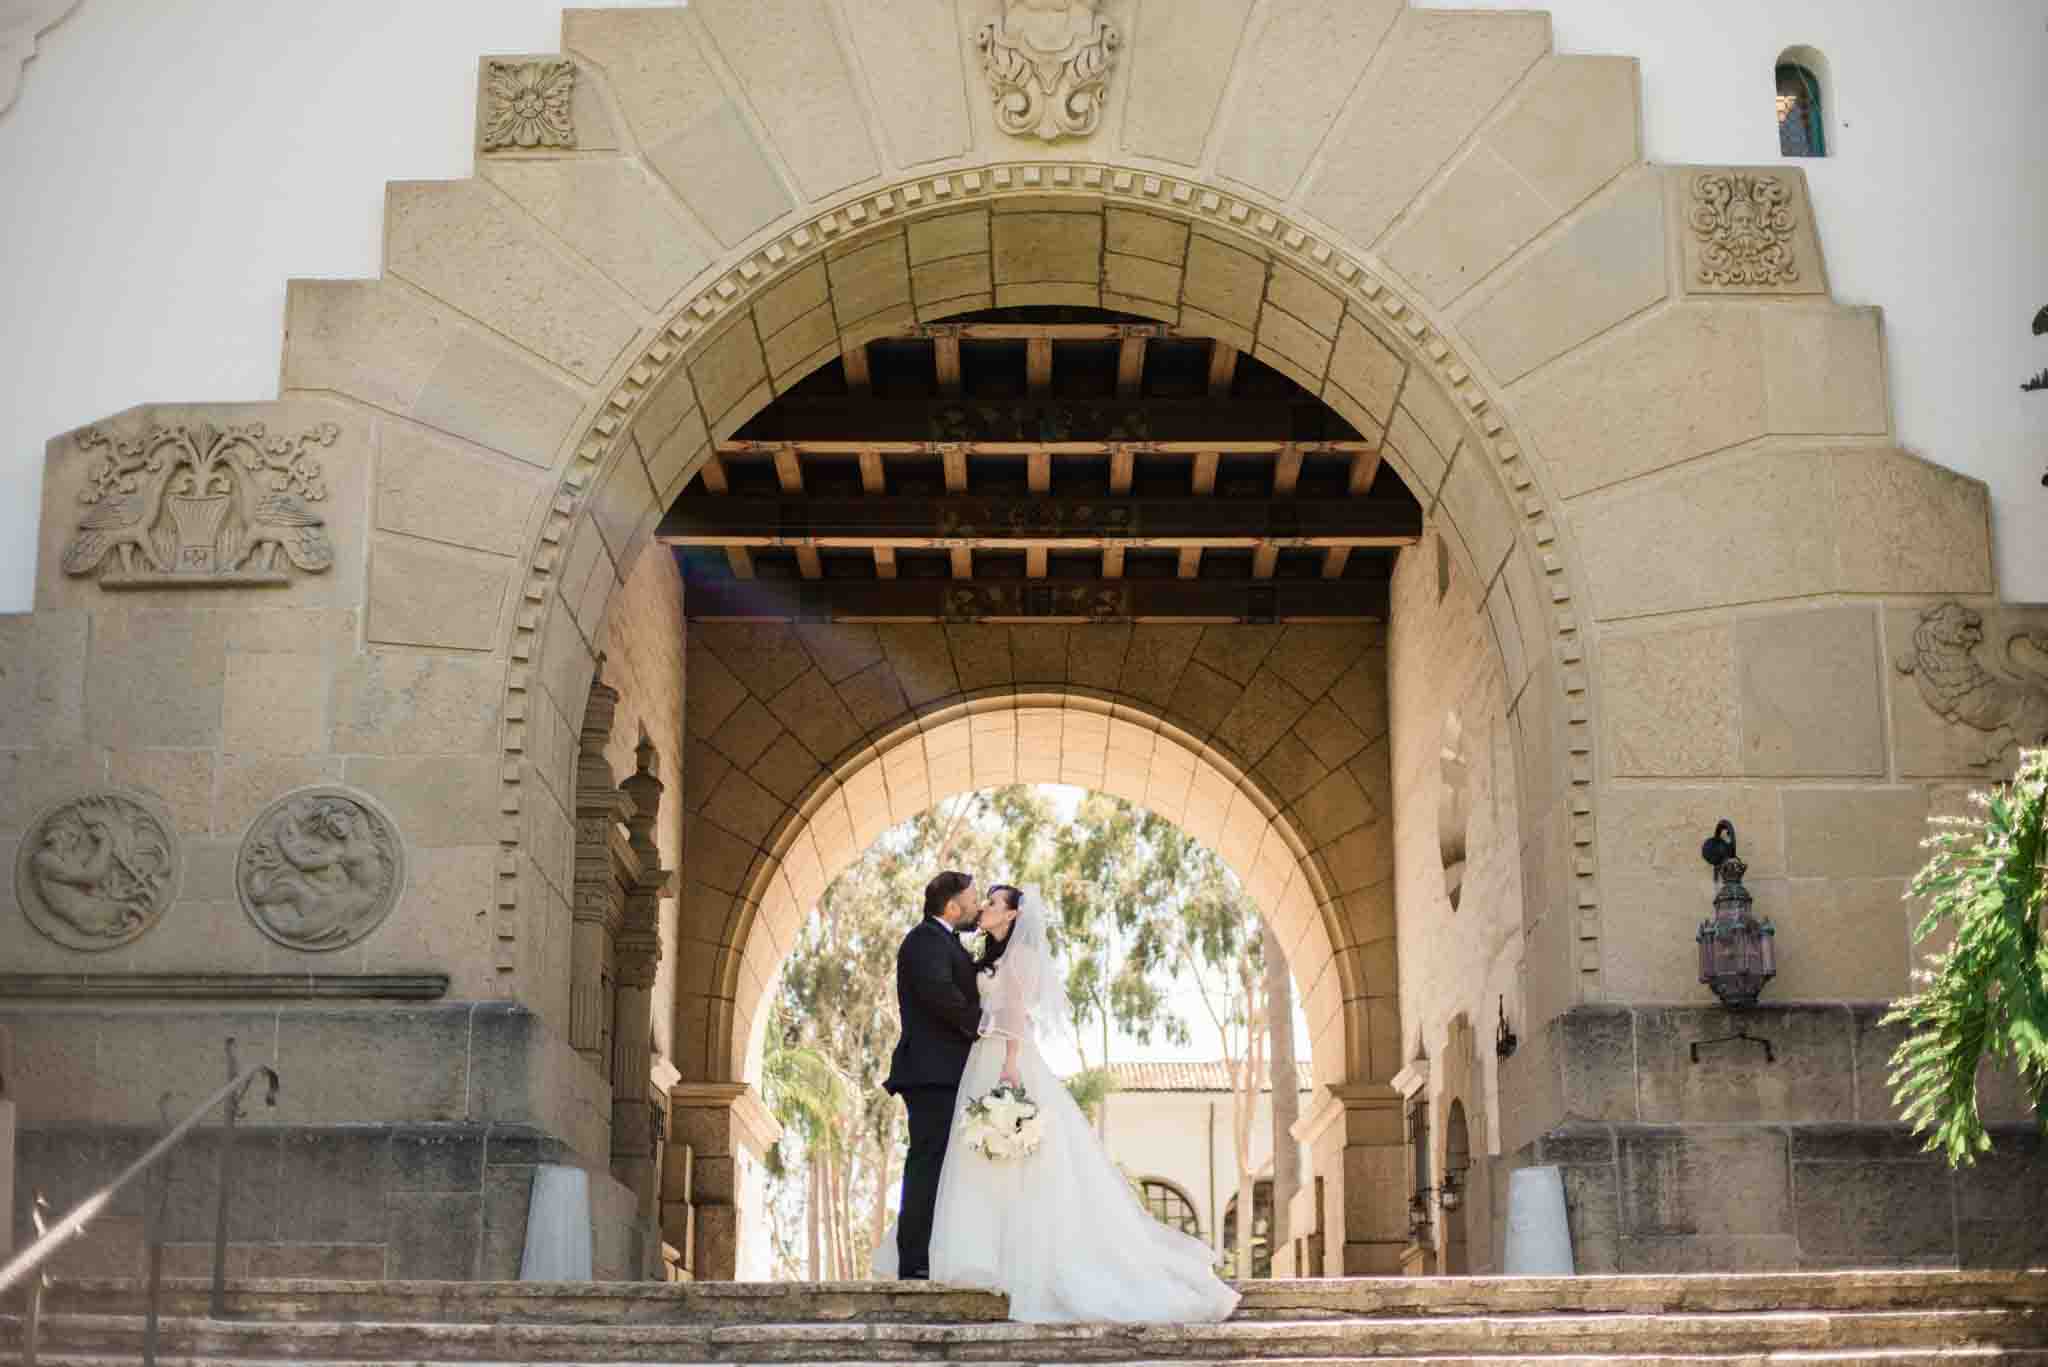 Getting Married with an Officiant at the Santa Barbara